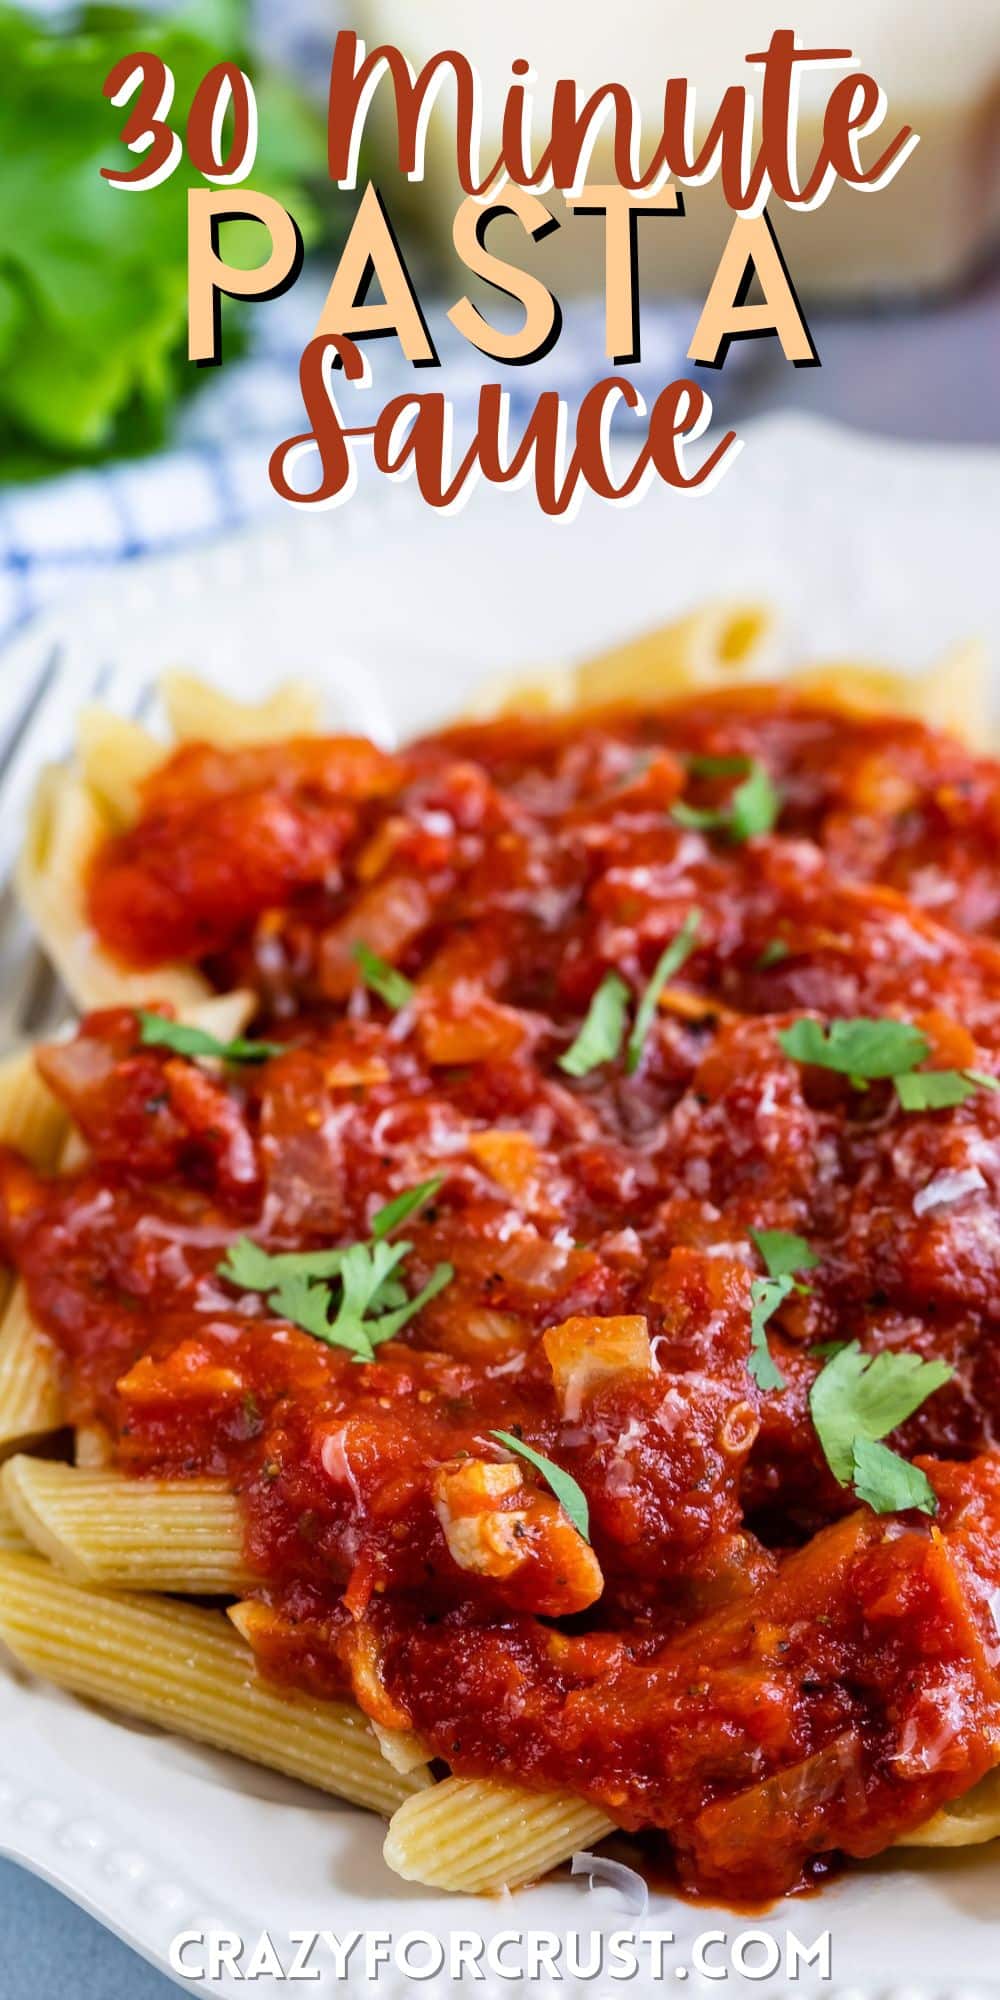 red pasta sauce on top of pasta on a white plate with words on the image.